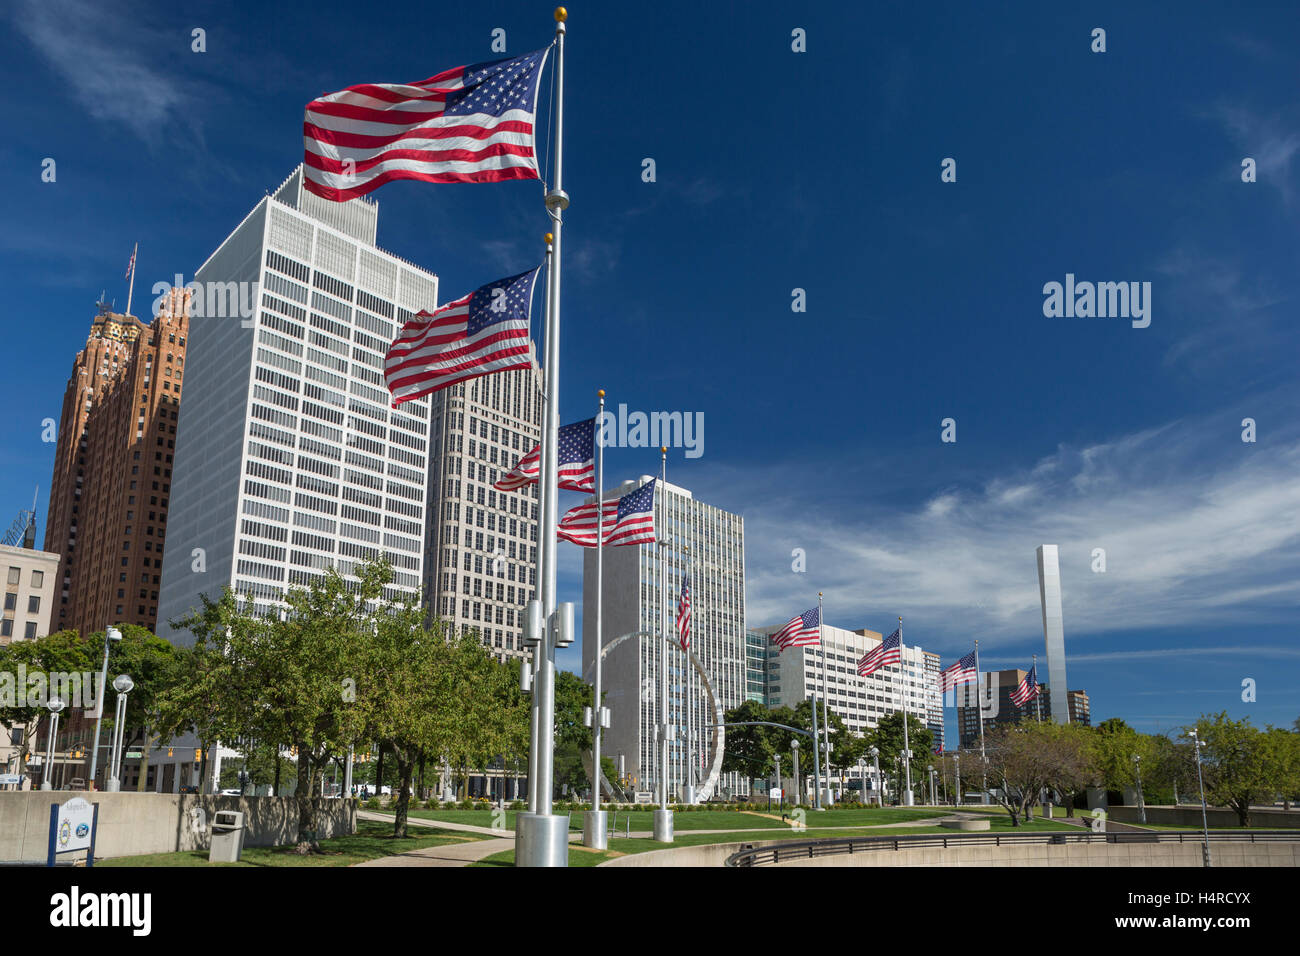 UNITED STATES NATIONAL FLAGS FLYING OVER HART PLAZA DOWNTOWN DETROIT MICHIGAN USA Banque D'Images